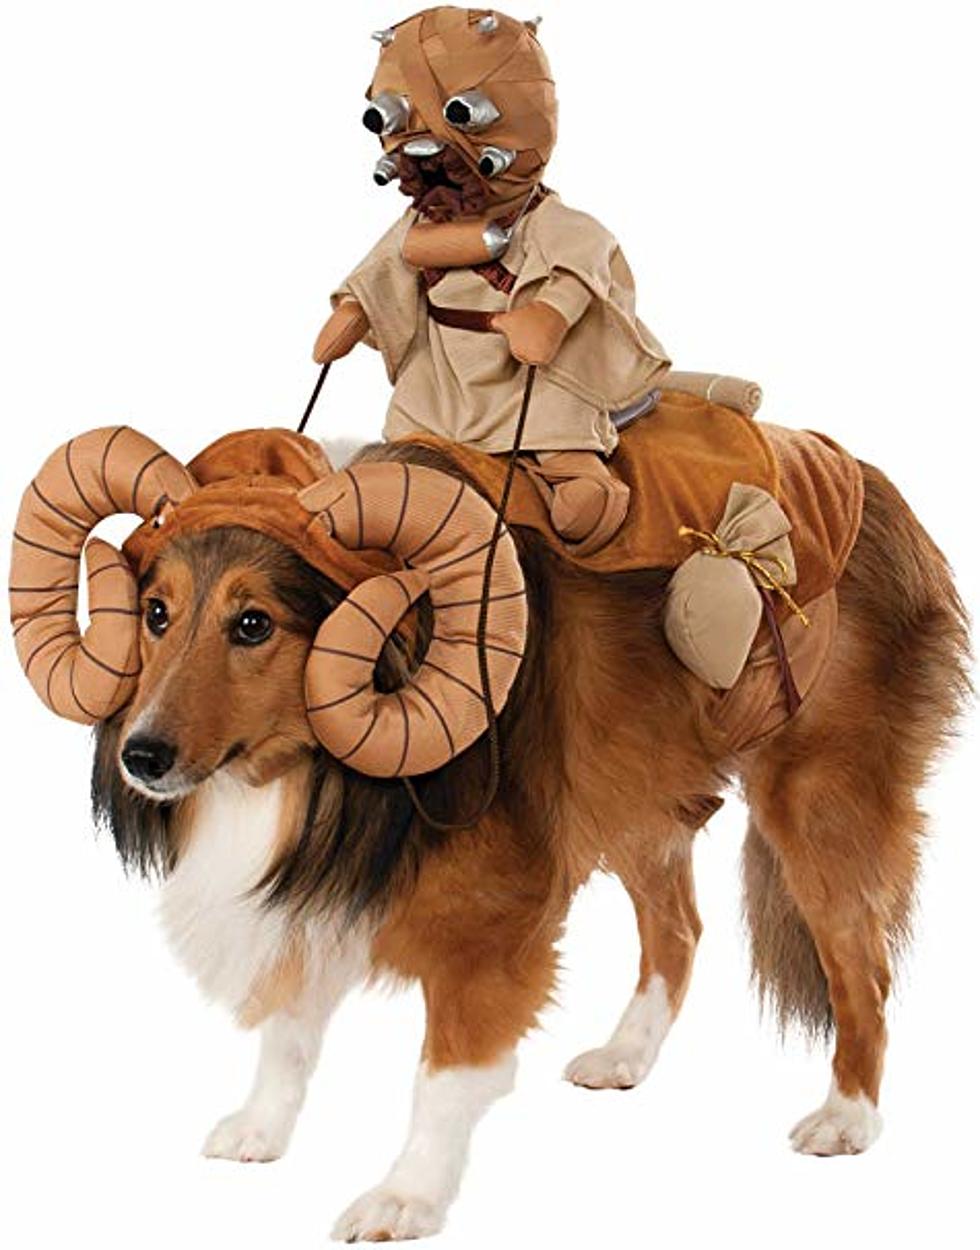 5 Dog Halloween Costumes That Get 4 Paws Up